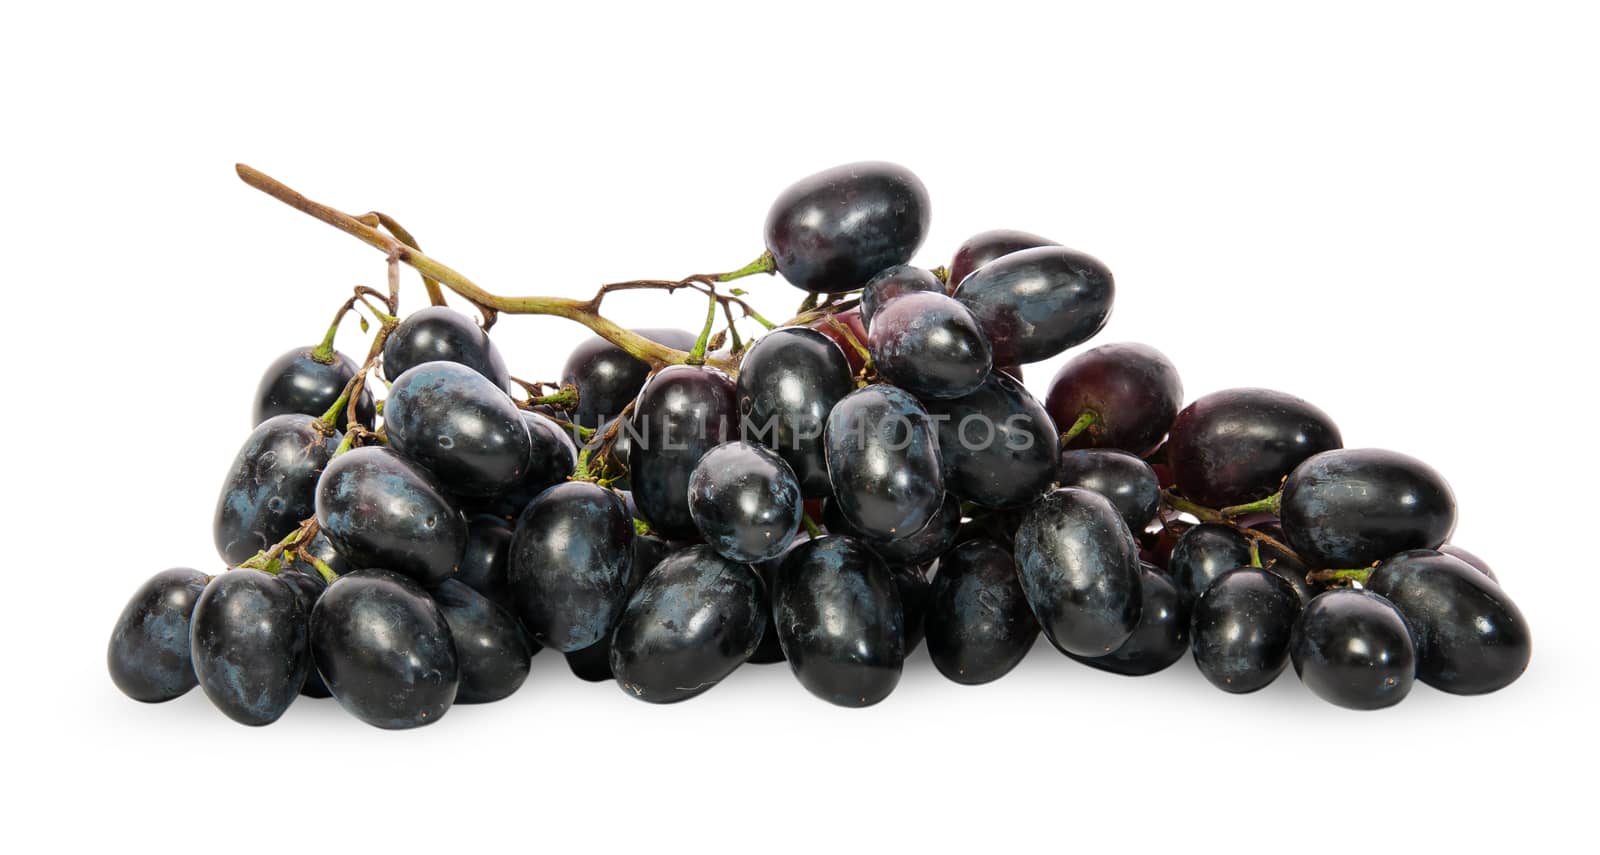 Bunch of ripe dark grapes by Cipariss